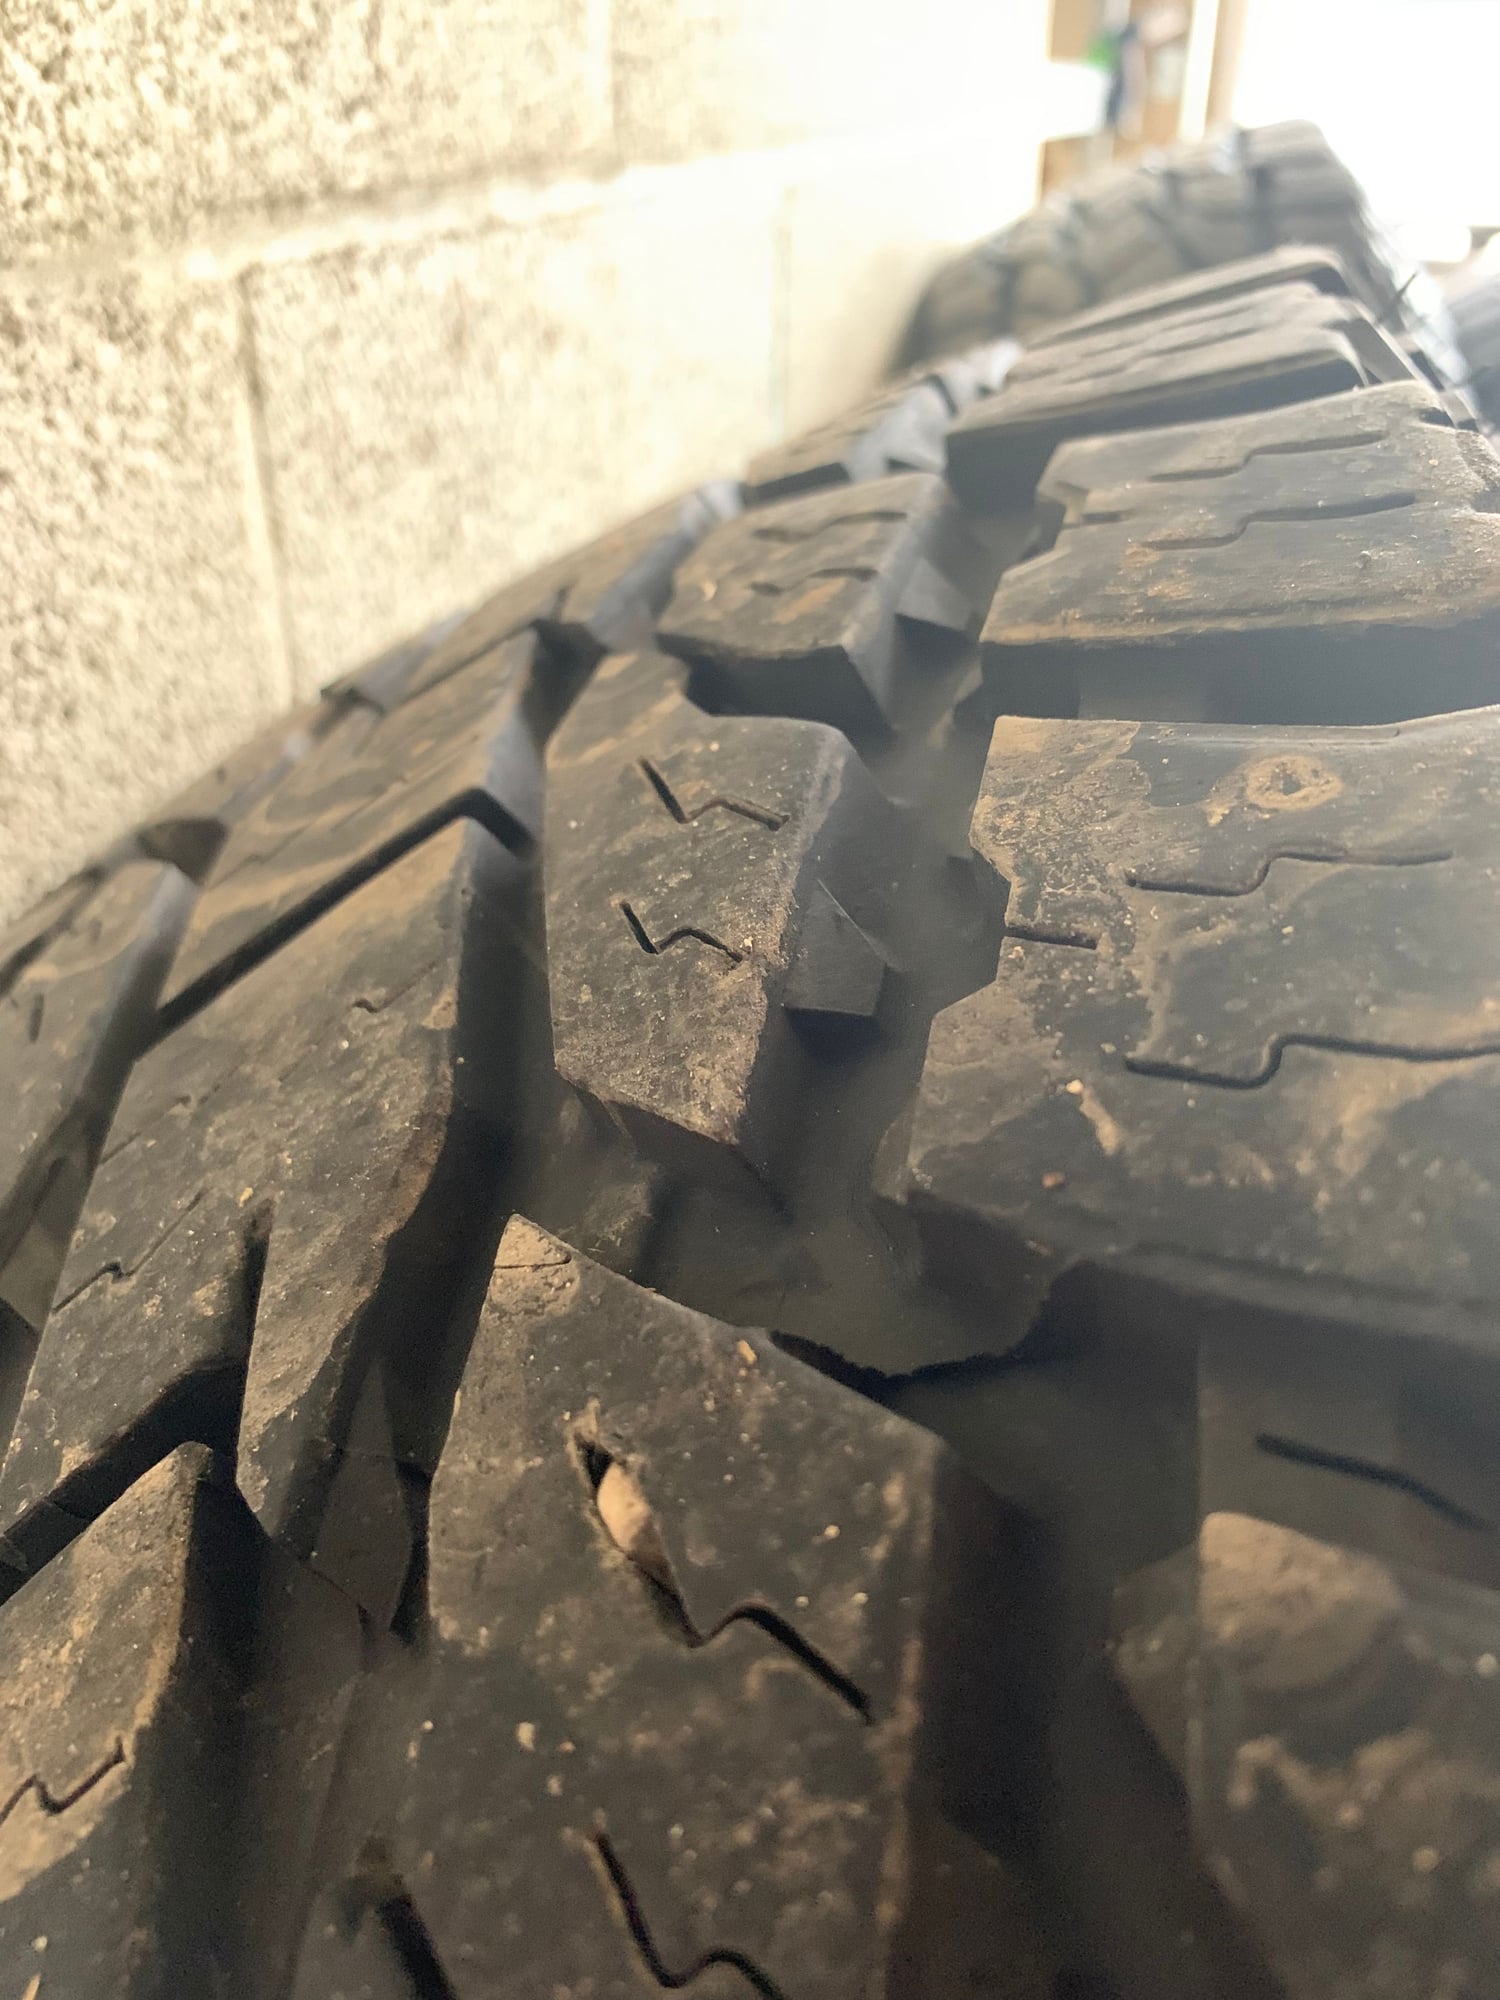 Wheels and Tires/Axles - 5 JK Wheels & Tires (285/75R17) - Used - 2007 to 2018 Jeep Wrangler - Austintown, OH 44515, United States